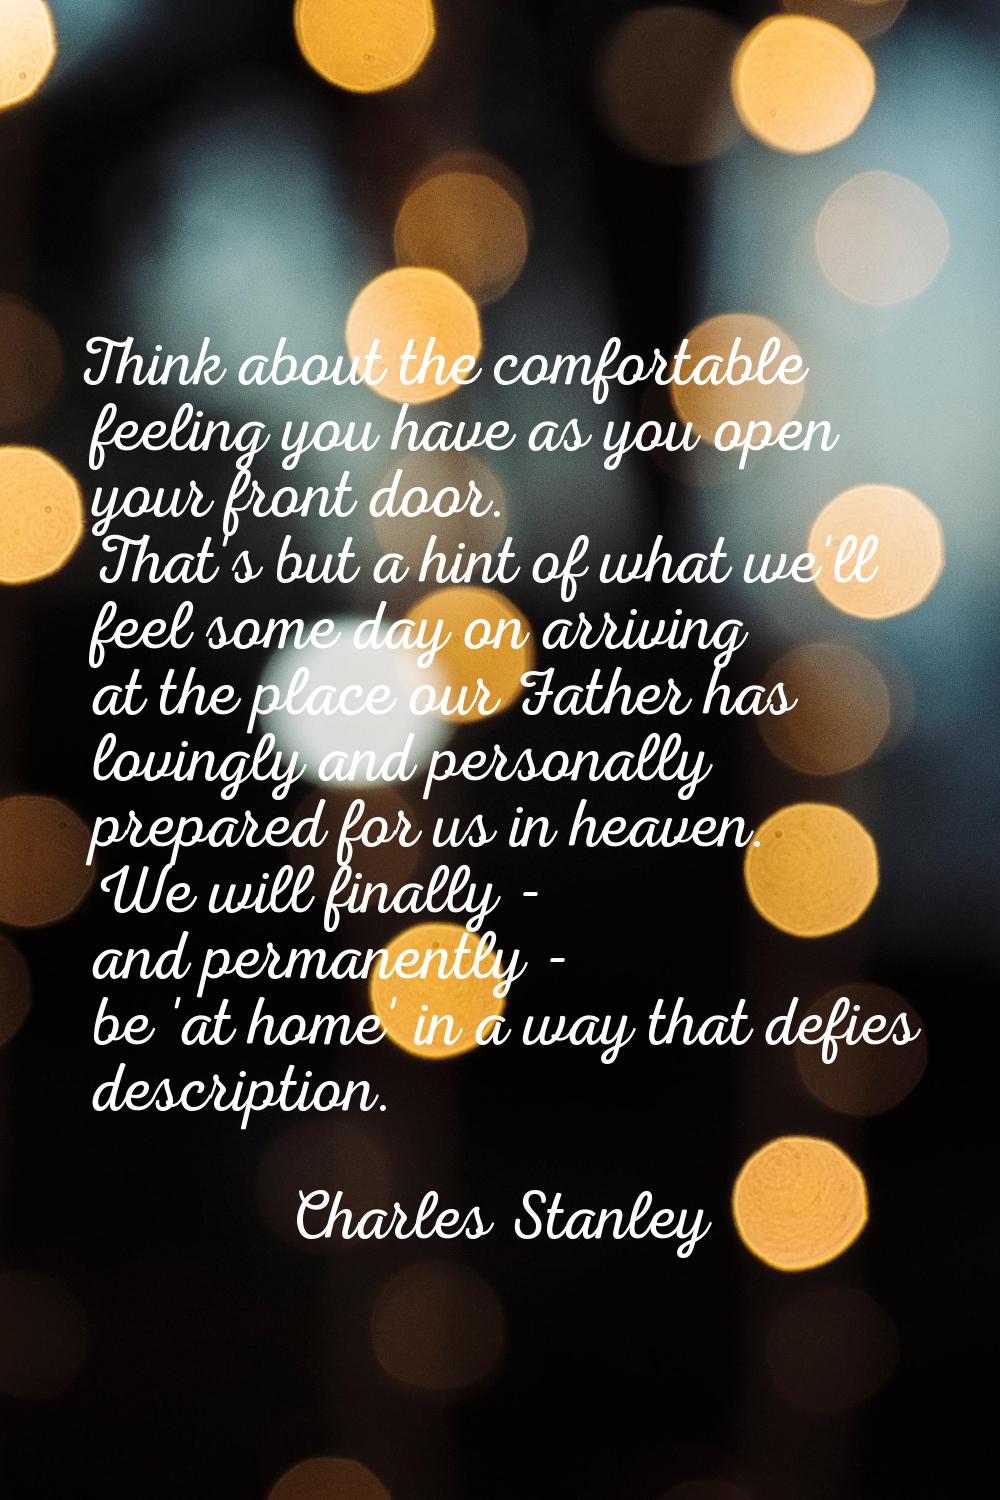 Think about the comfortable feeling you have as you open your front door. That's but a hint of what